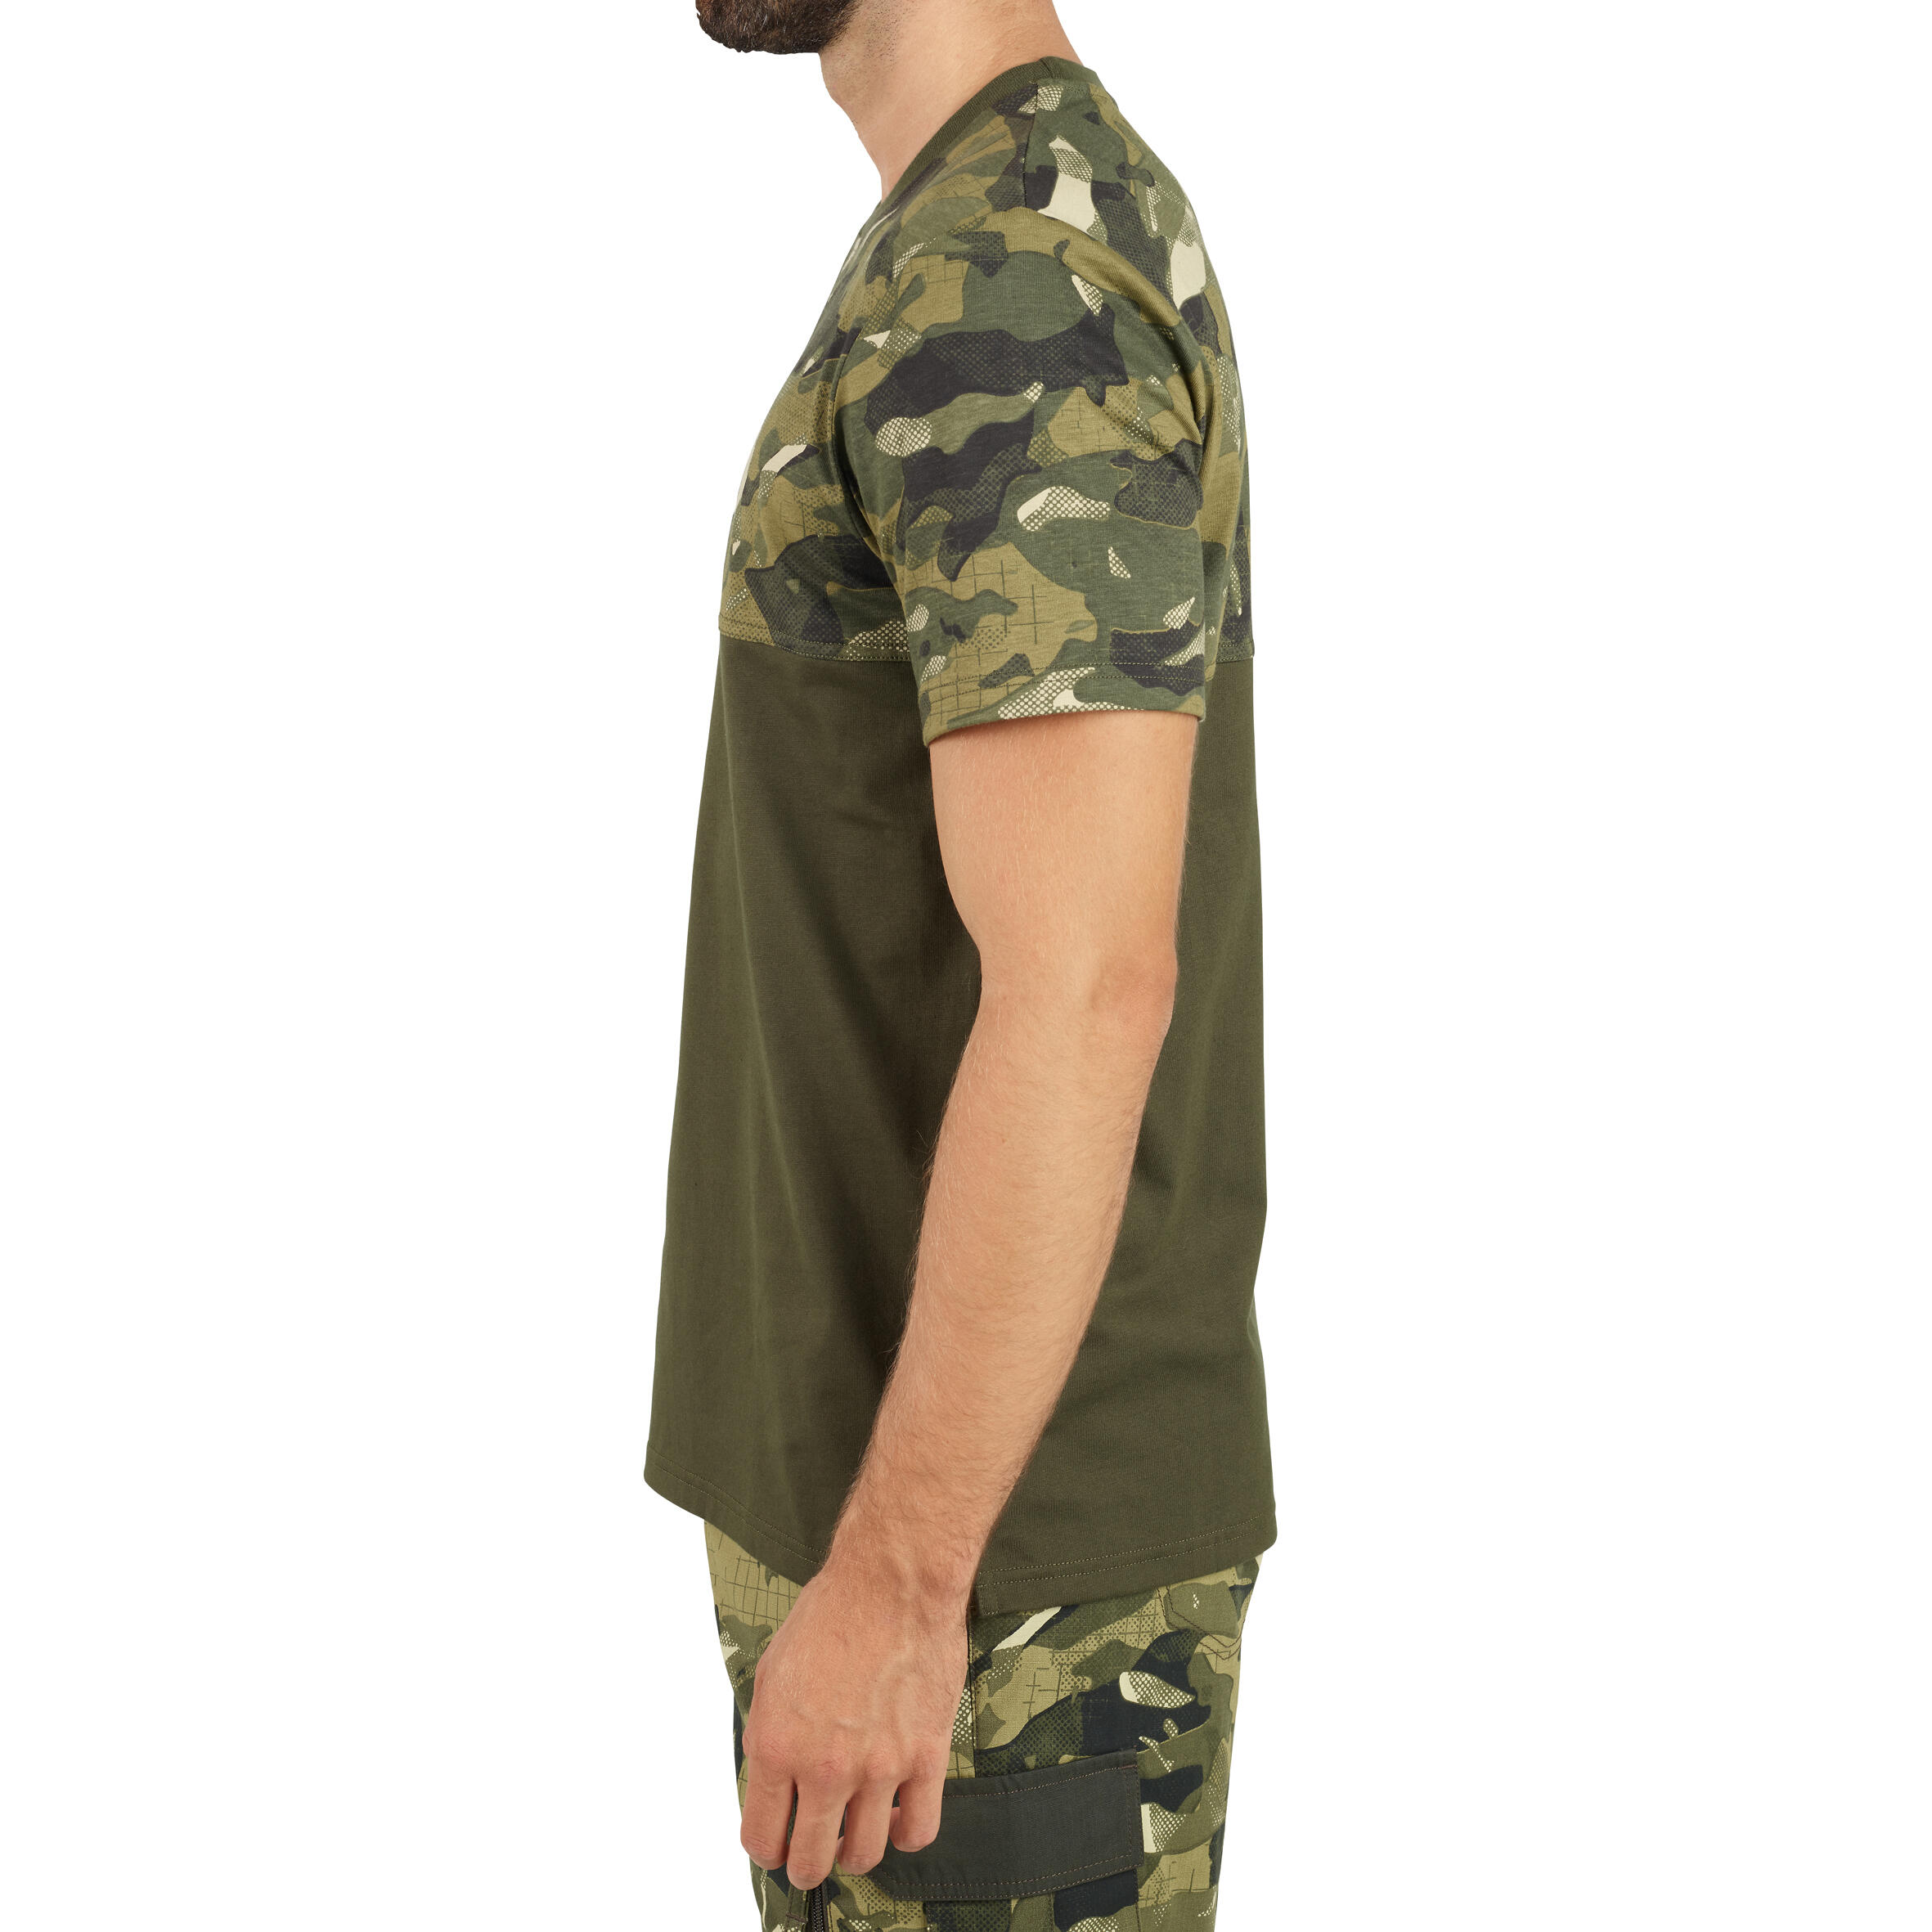 Men's Country Sport Short-Sleeved Resistant Cotton T-Shirt - 500 Woodland Camo/P 5/7